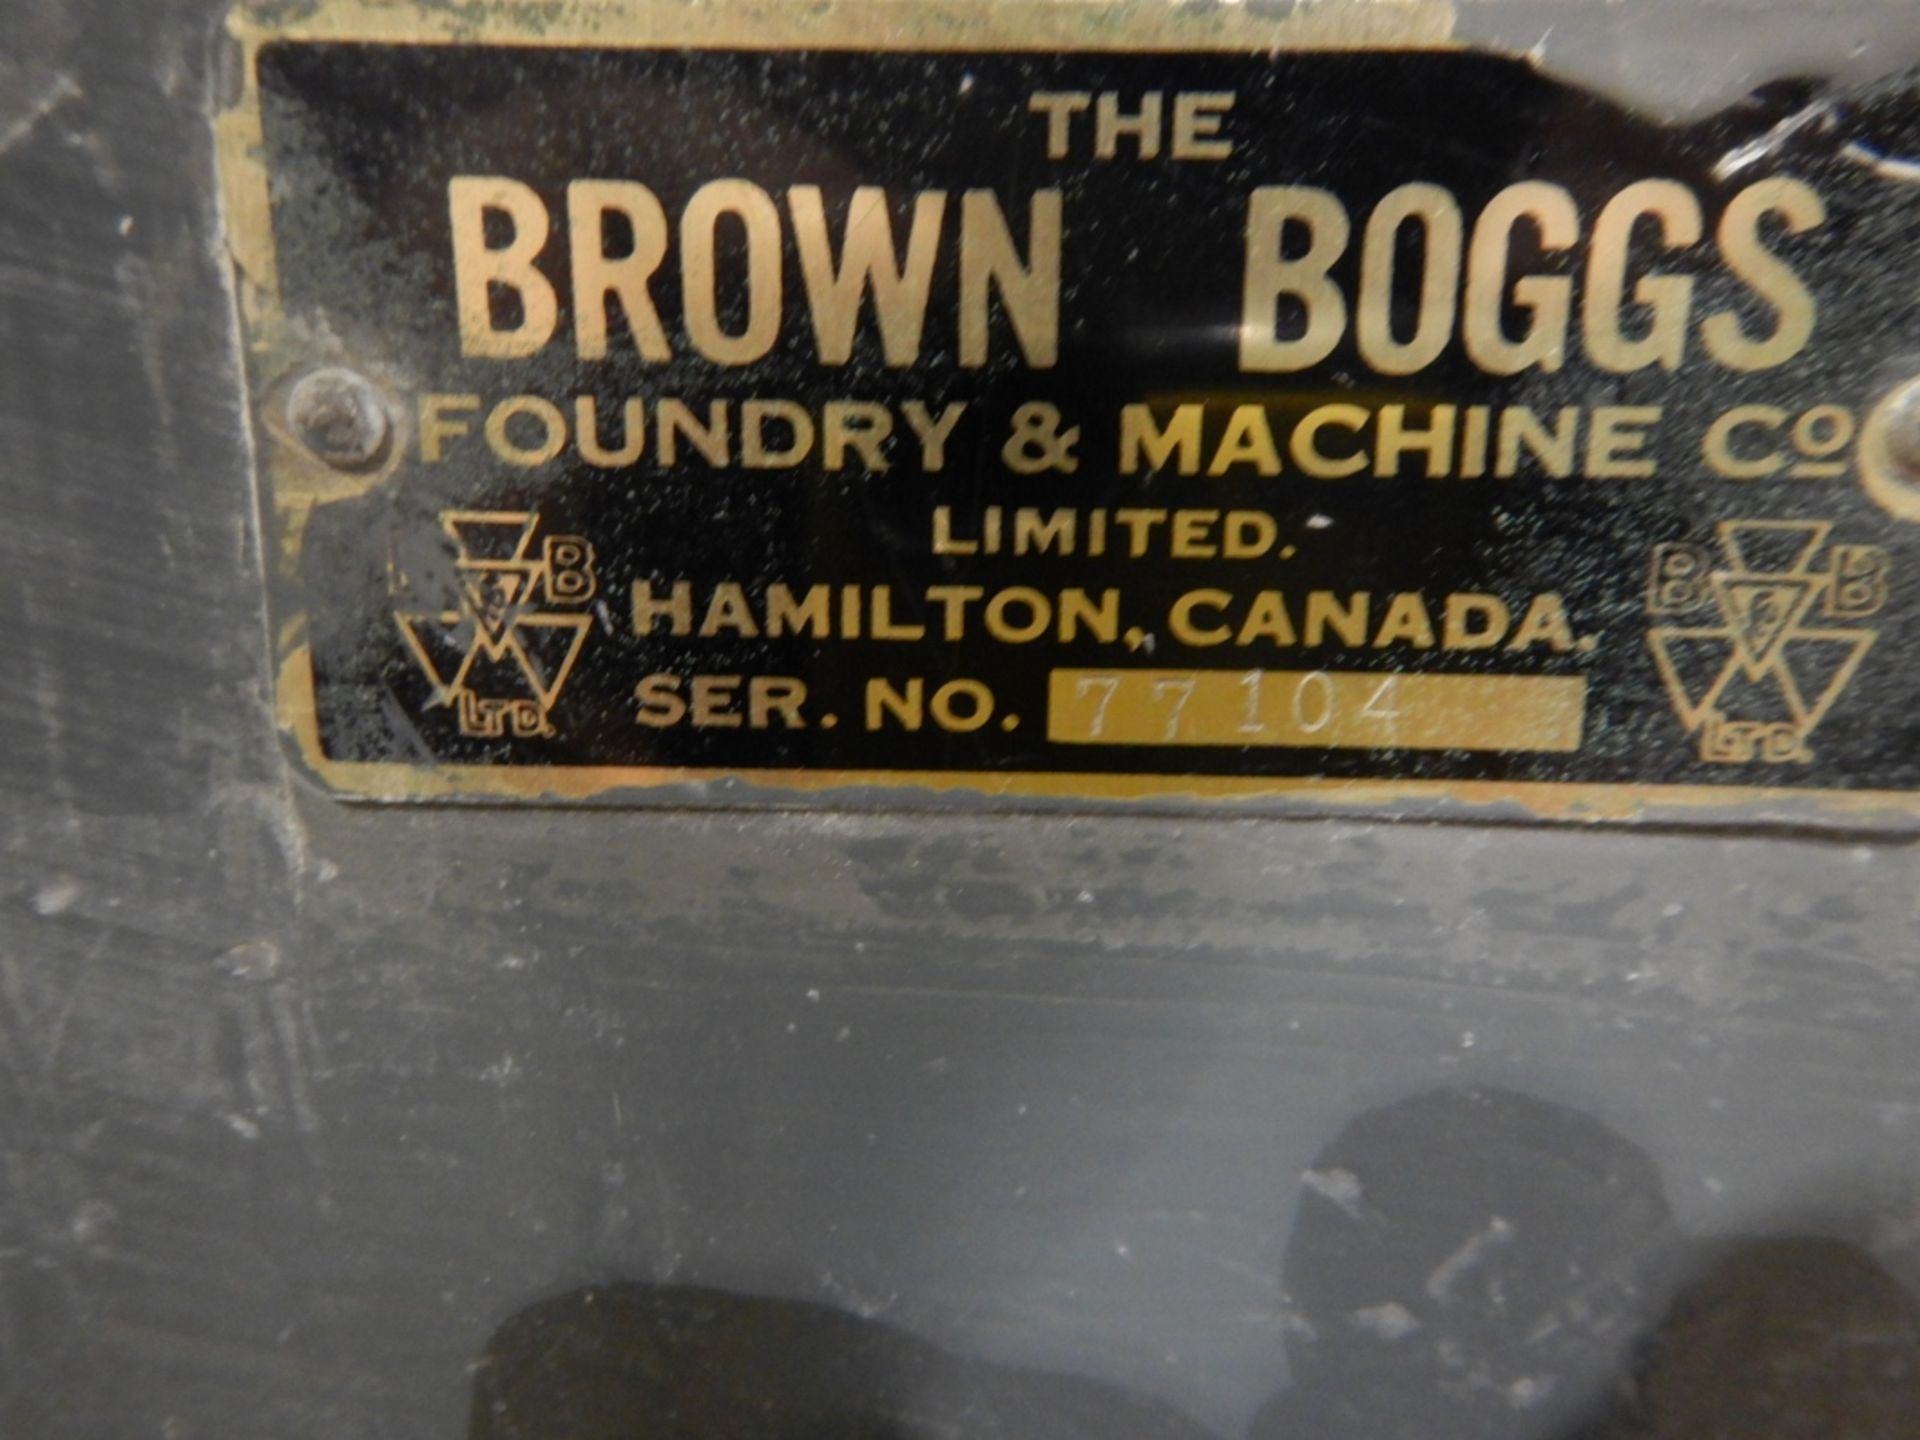 BROWN BOGGS 60 INCH PNEUMATIC 16 GAUGE METAL SHEAR LOCATED IN SYLVAN LAKE, AB, CANADA & REMOVAL IS - Image 6 of 7